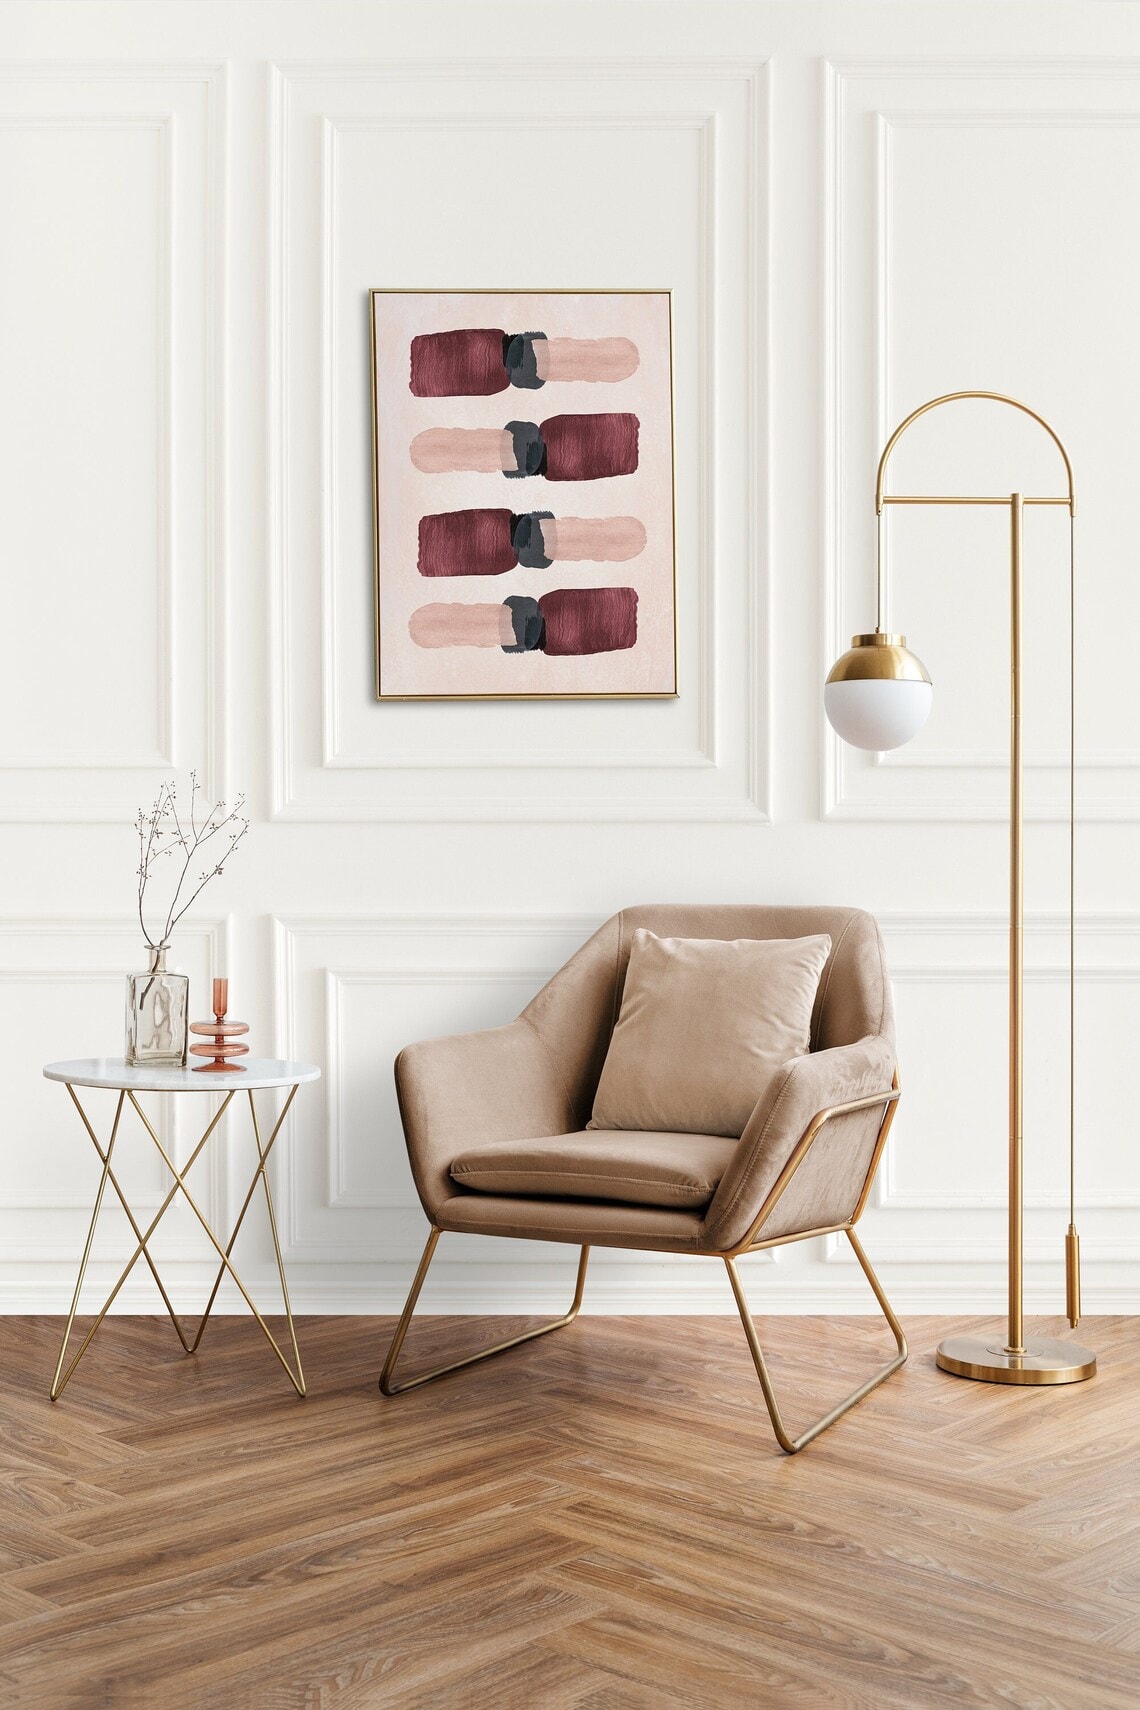 Burgundy and soft pink modern artwork framed in gold above a side chair